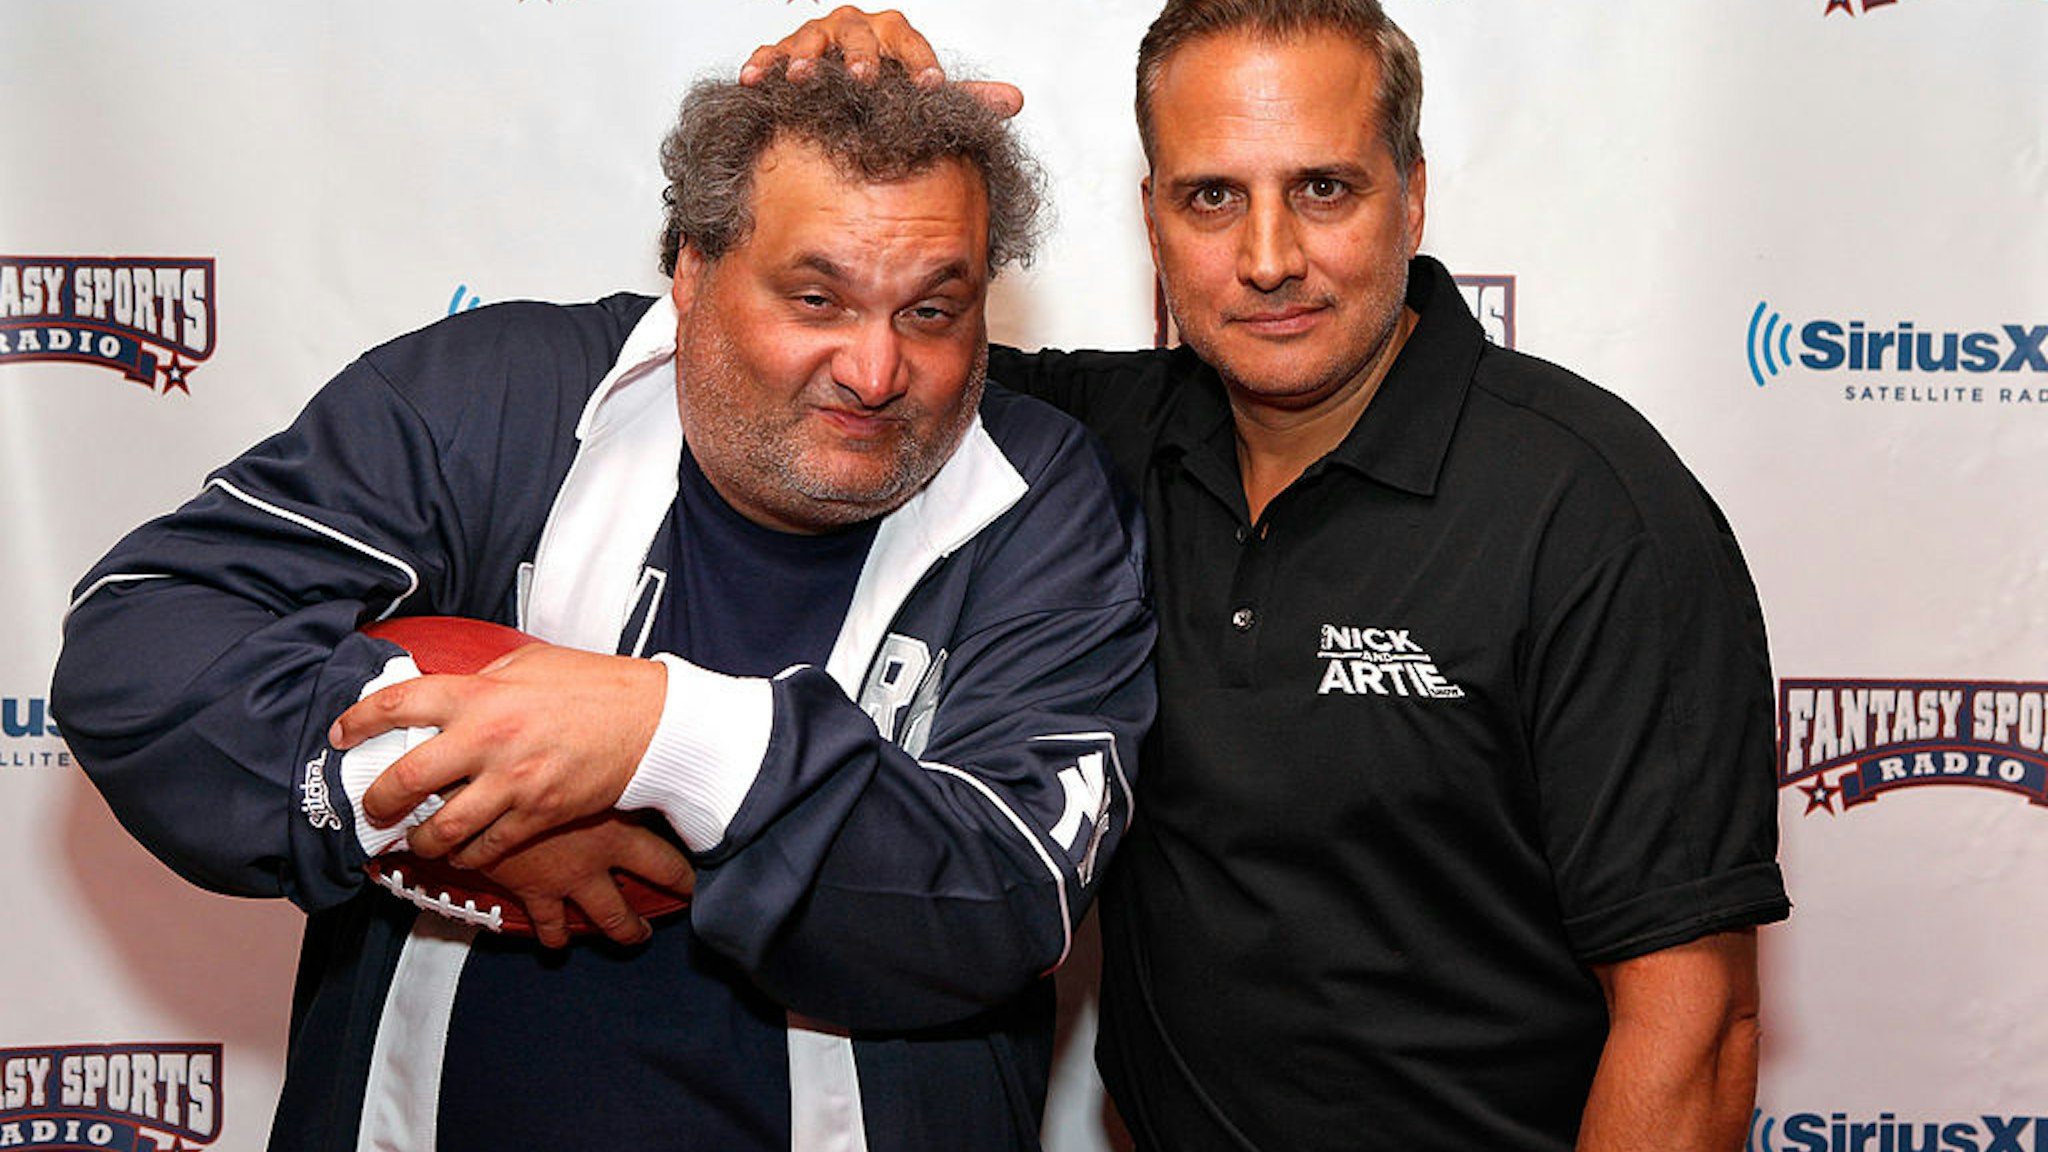 NEW YORK, NY - JULY 19: Hosts of The Nick &amp; Artie Show Artie Lange (L) and Nick DiPaolo (R) attend Sirius XM Annual Celebrity Fantasy Football Draft at Hard Rock Cafe New York on July 19, 2012 in New York City. (Photo by Cindy Ord/Getty Images for Sirius XM Radio)